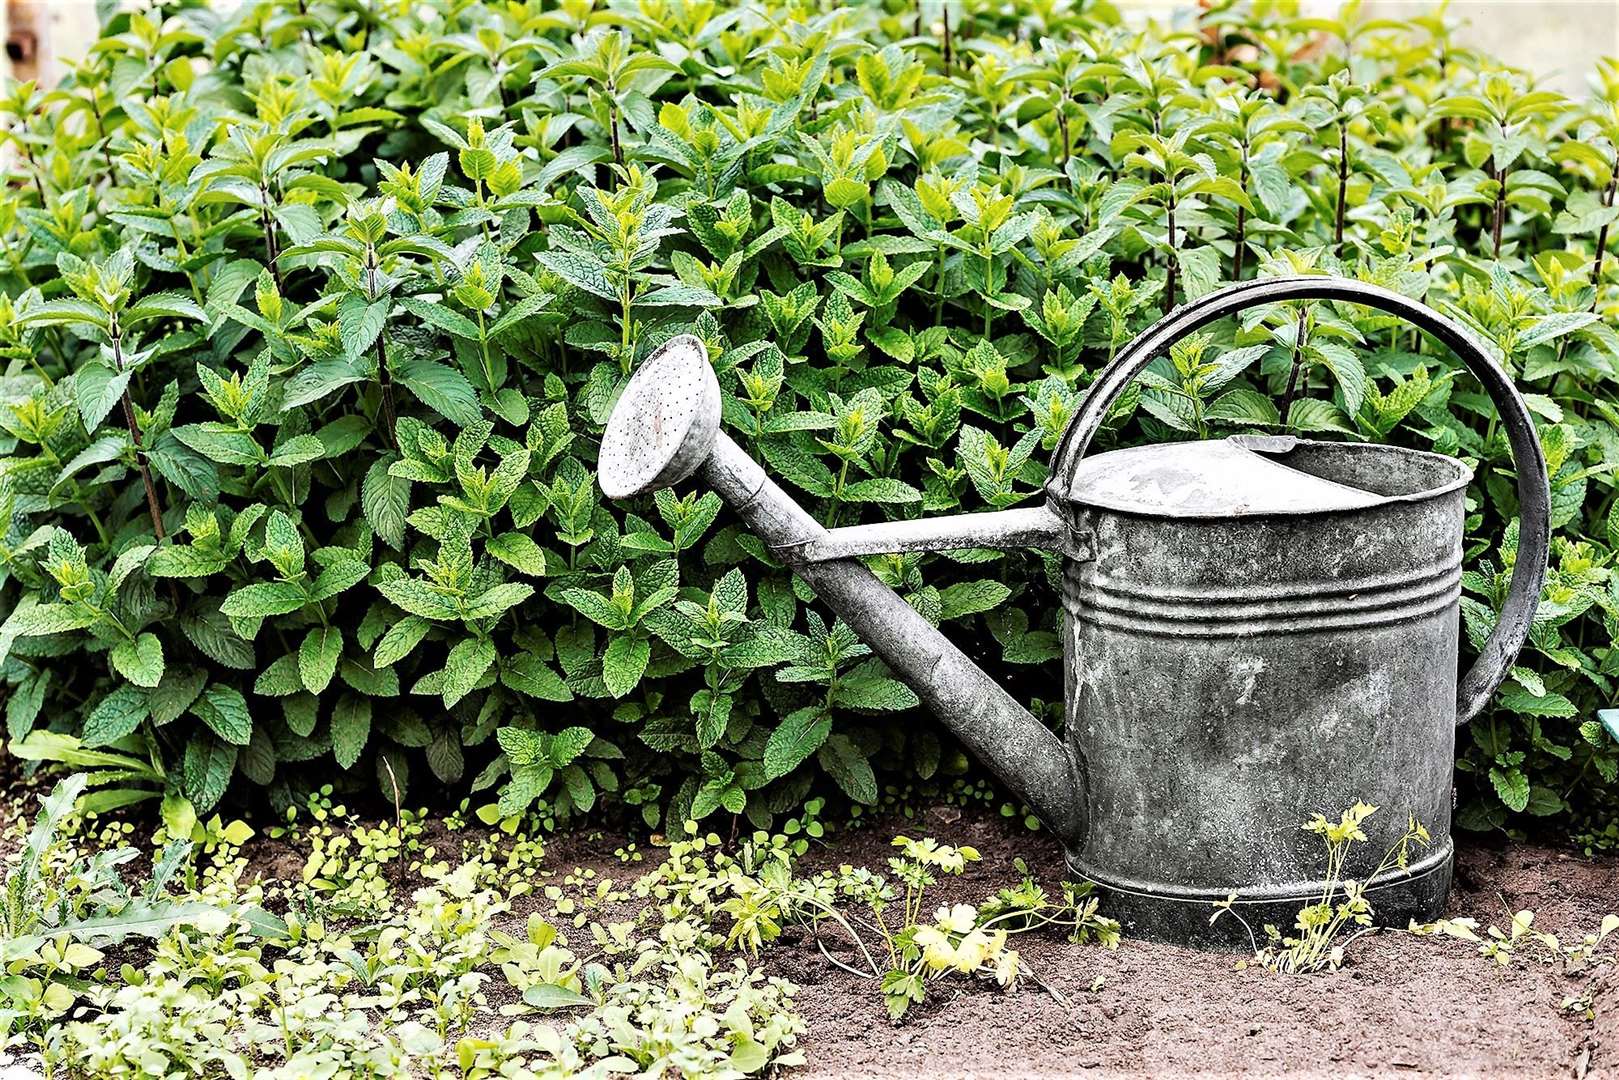 Scottish Water is working with gardening experts to provide simple tips and hints to help Scotland's gardeners take steps to help tackle climate change. Advice includes how to save water during times of drought risk and also how to help prevent flooding during times of extreme wet weather. Among the simple tips is to use a watering can instead of a sprinkler to save water - and to use old watering cans to collect rainwater, helping to prevent flooding